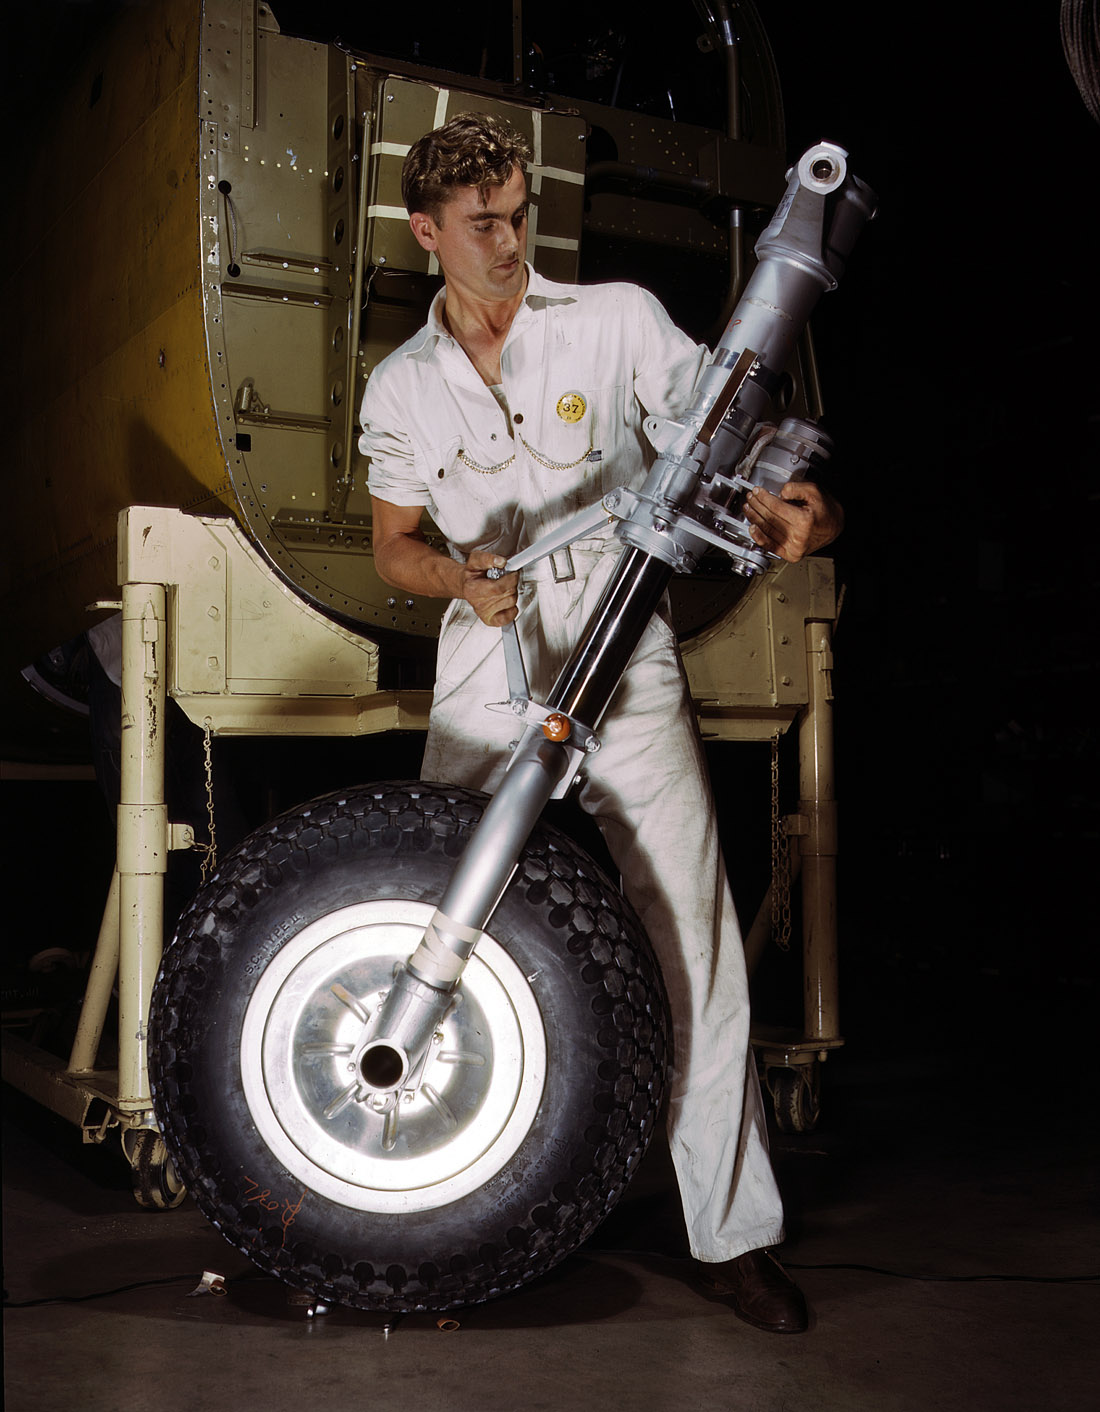 October 1942. B-25 bomber nose wheel and landing gear assembly at the North American Aviation plant in Inglewood, California. View full size. 4x5 Kodachrome transparency by Alfred Palmer for the Office of War Information.